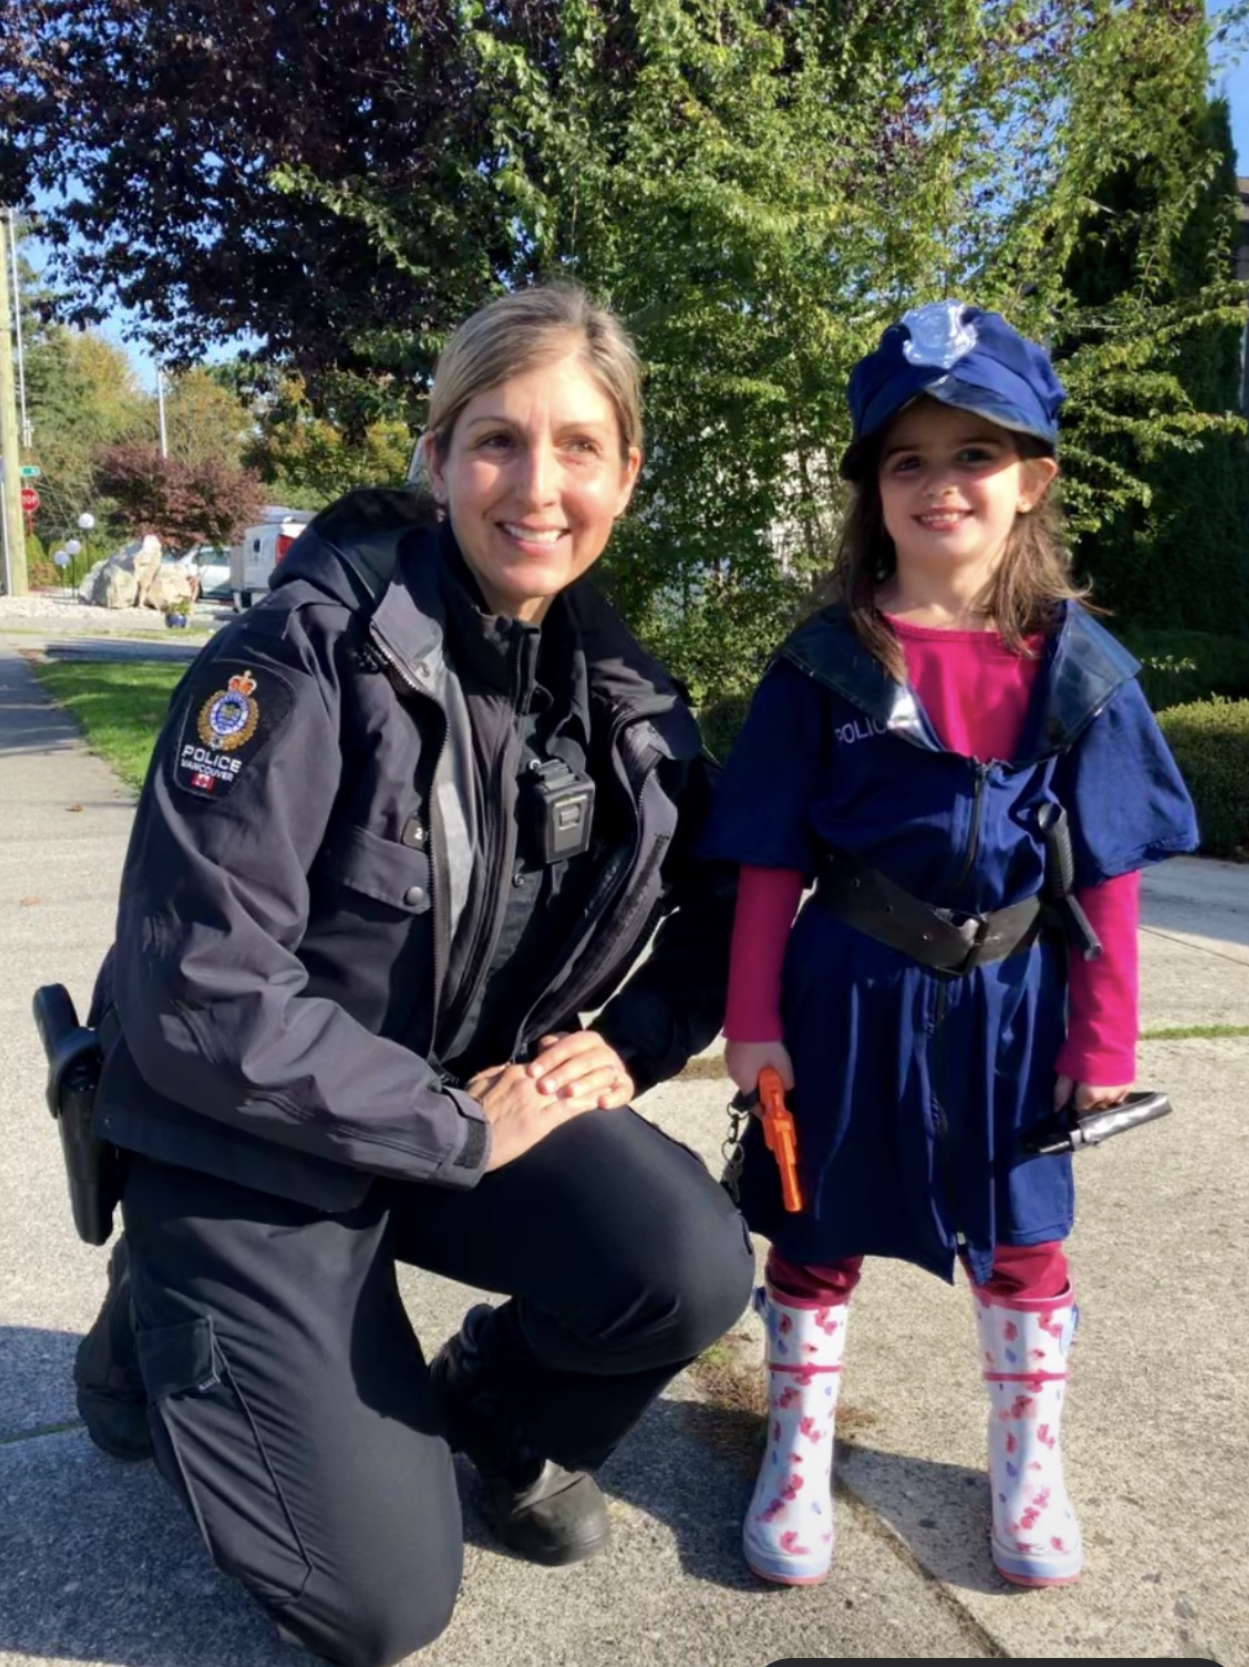 Cst. Holly Christie with little girl in policewoman costume